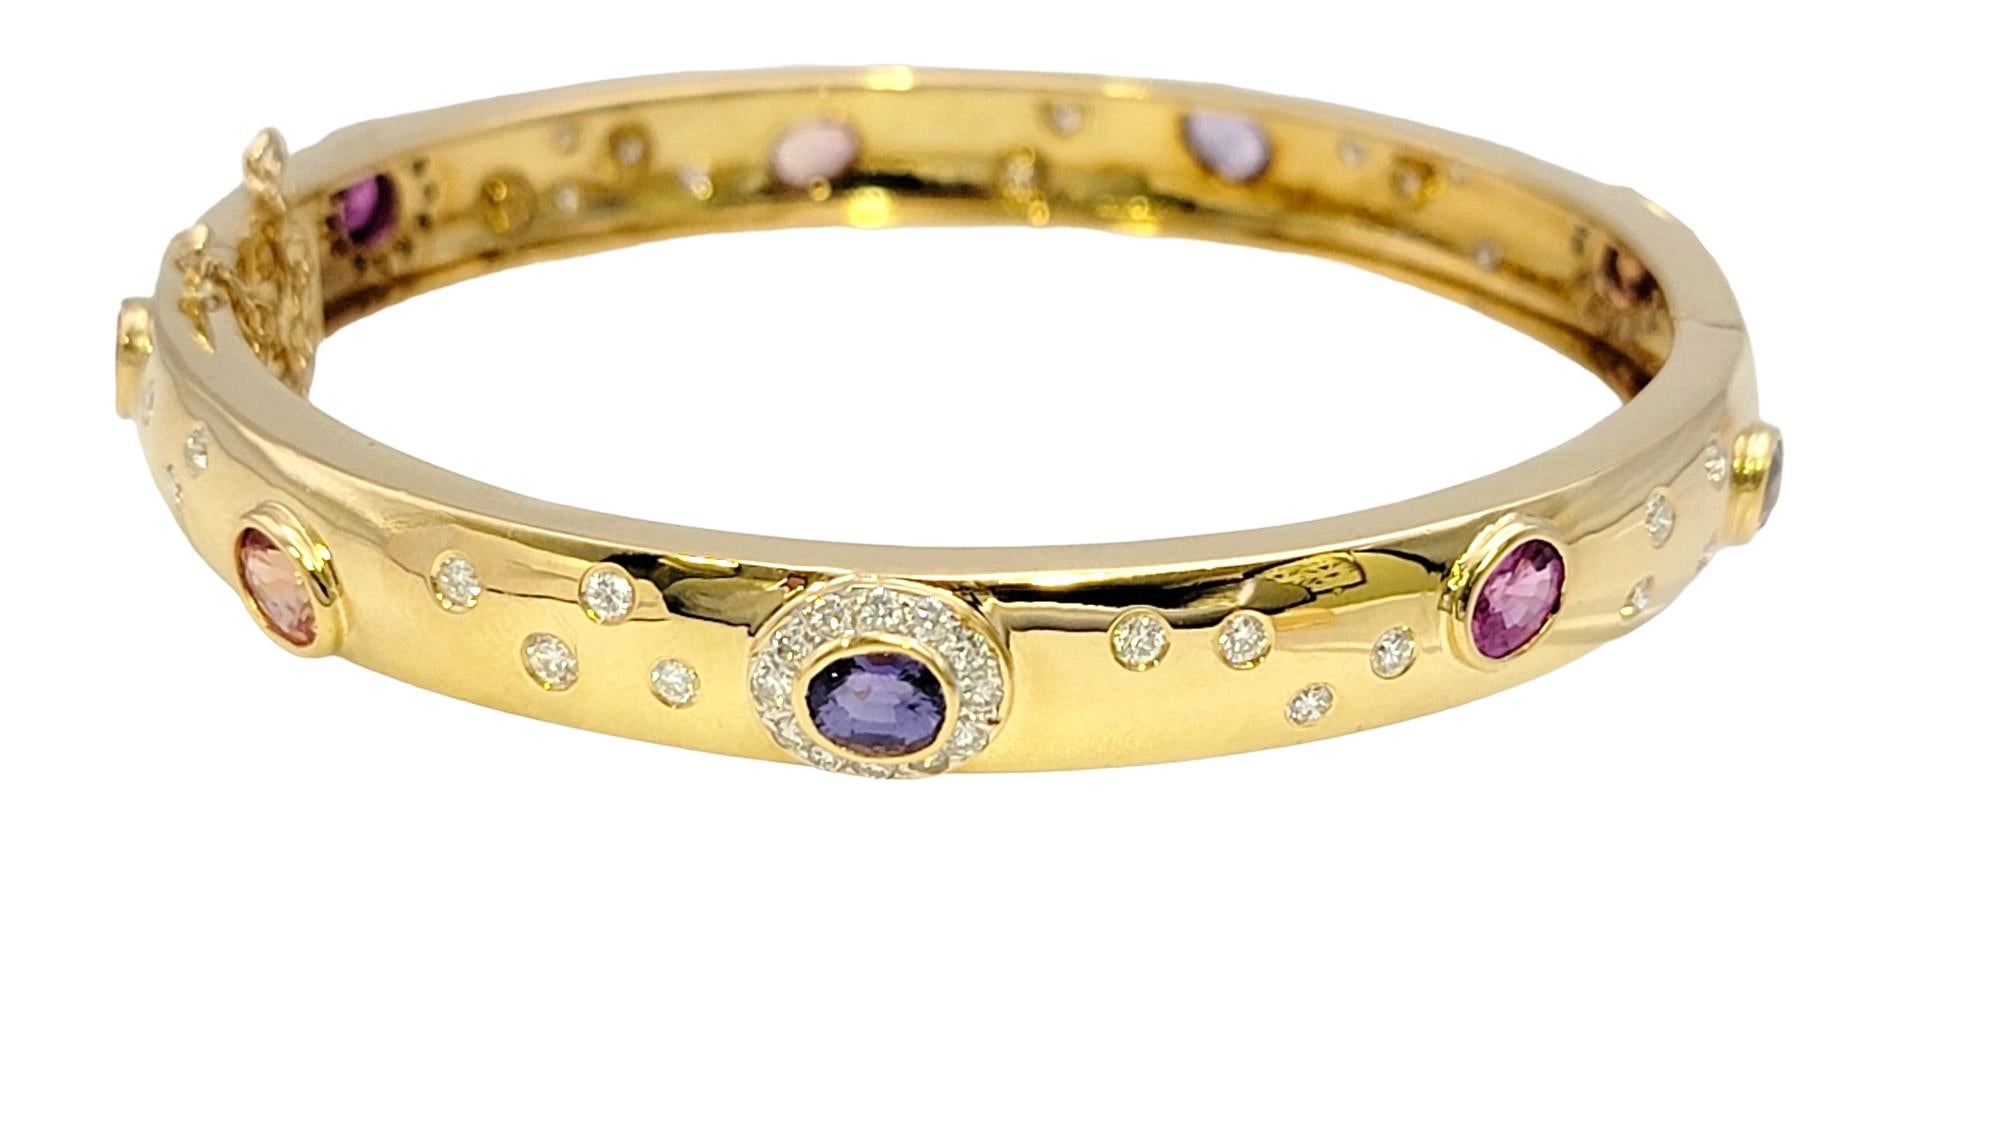 5.62 Carat Total Multi-Colored Sapphire and Diamond Yellow Gold Bangle Bracelet In Good Condition For Sale In Scottsdale, AZ